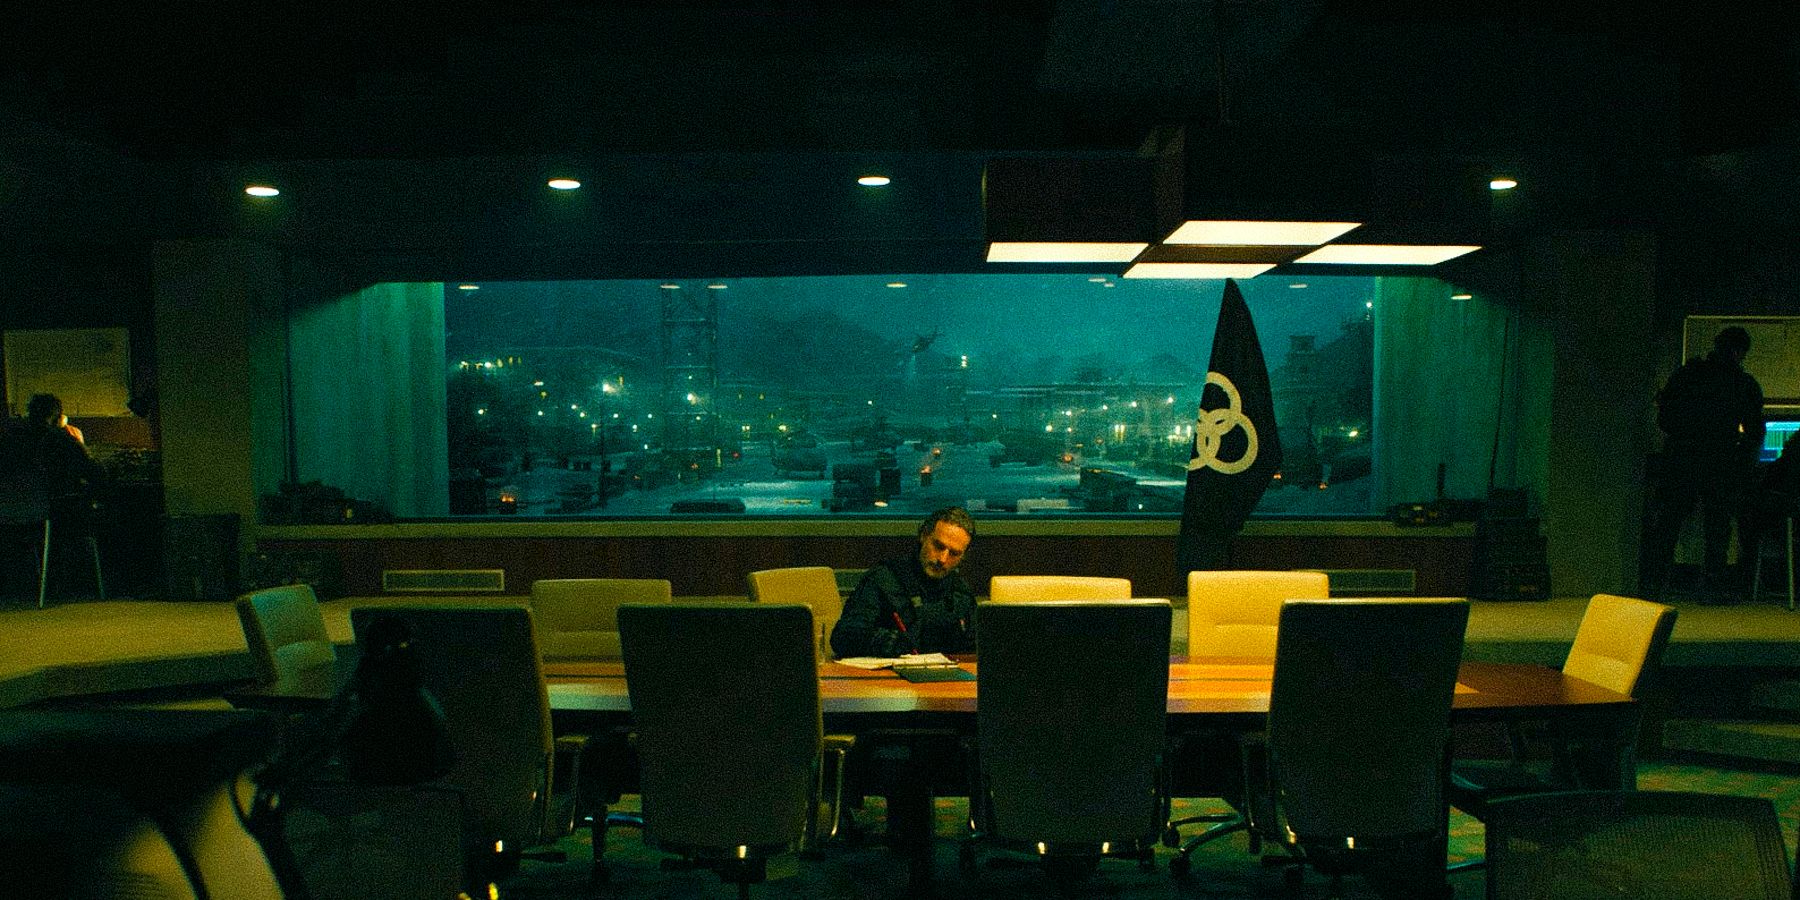 Rick Grimes in a conference room from The Walking Dead: The Ones Who Live.